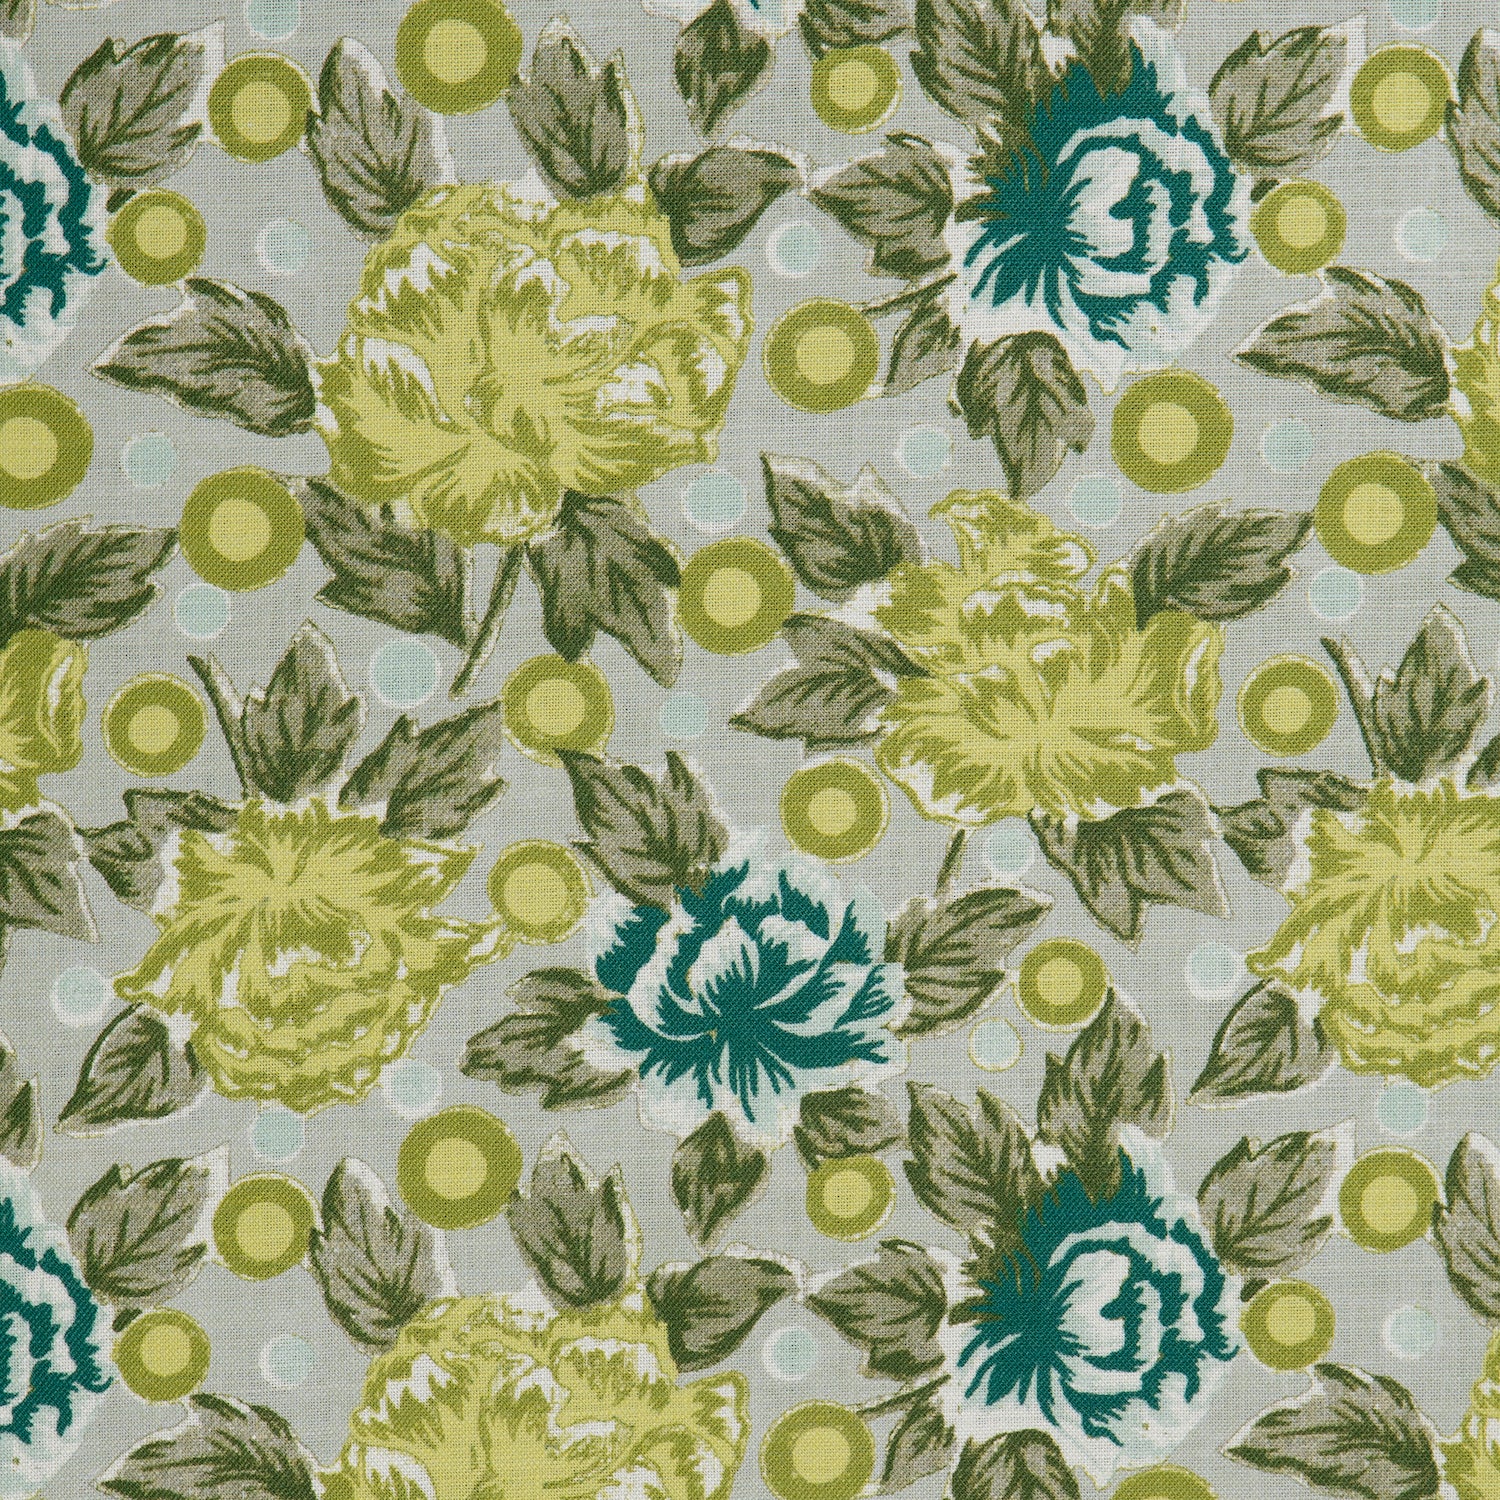 Detail of a printed linen fabric in a repeating china rose pattern in shades of yellow, blue and green on a gray field.